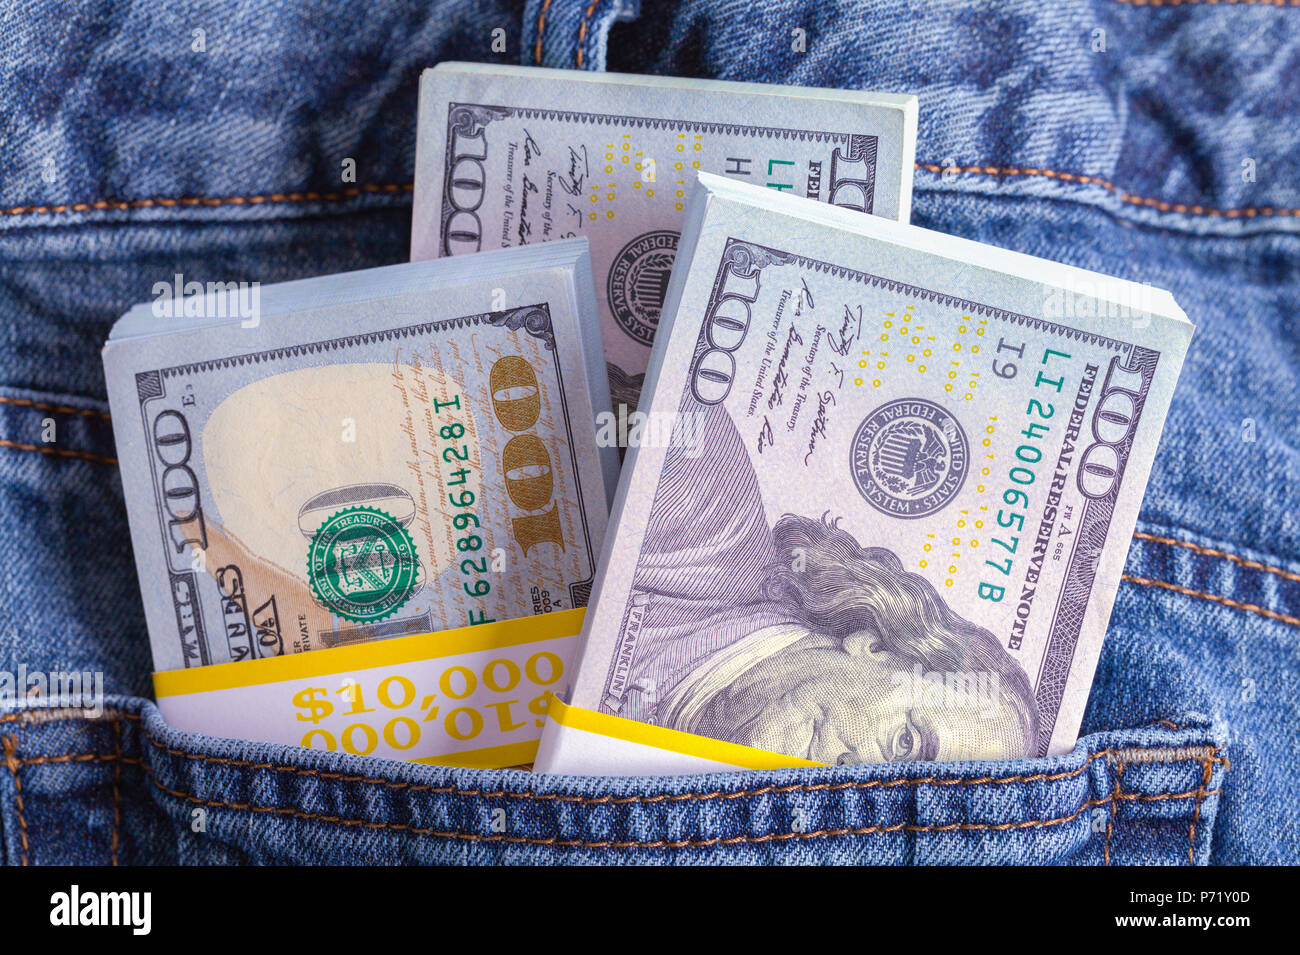 Blue Jeans Stuffed with Stacks of Cash Money. Stock Photo